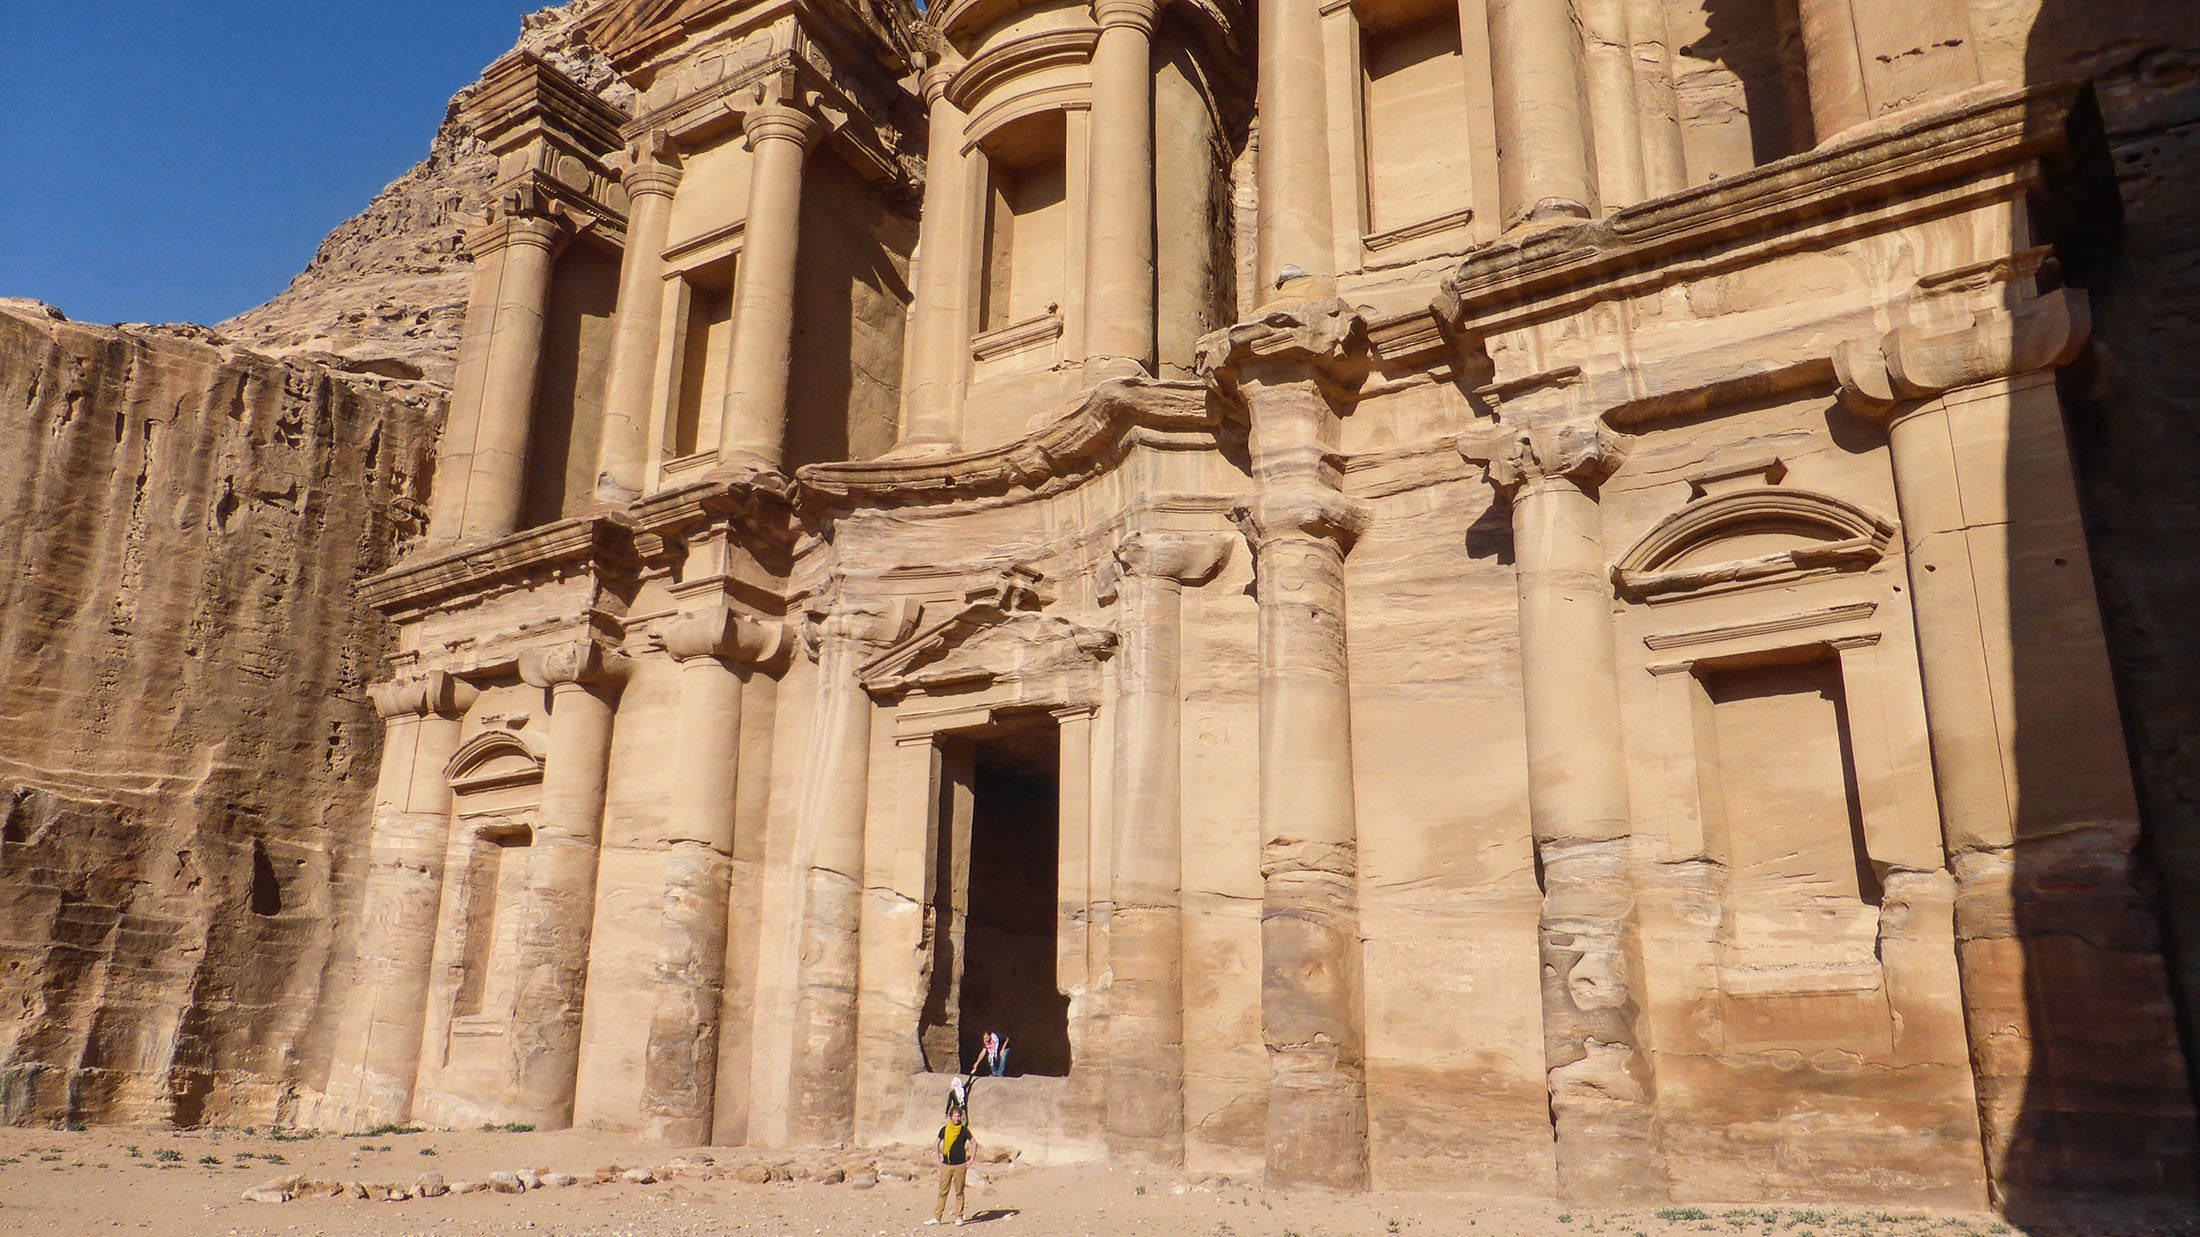 The Monastery (Ad Deir) of Petra from the side Jordan